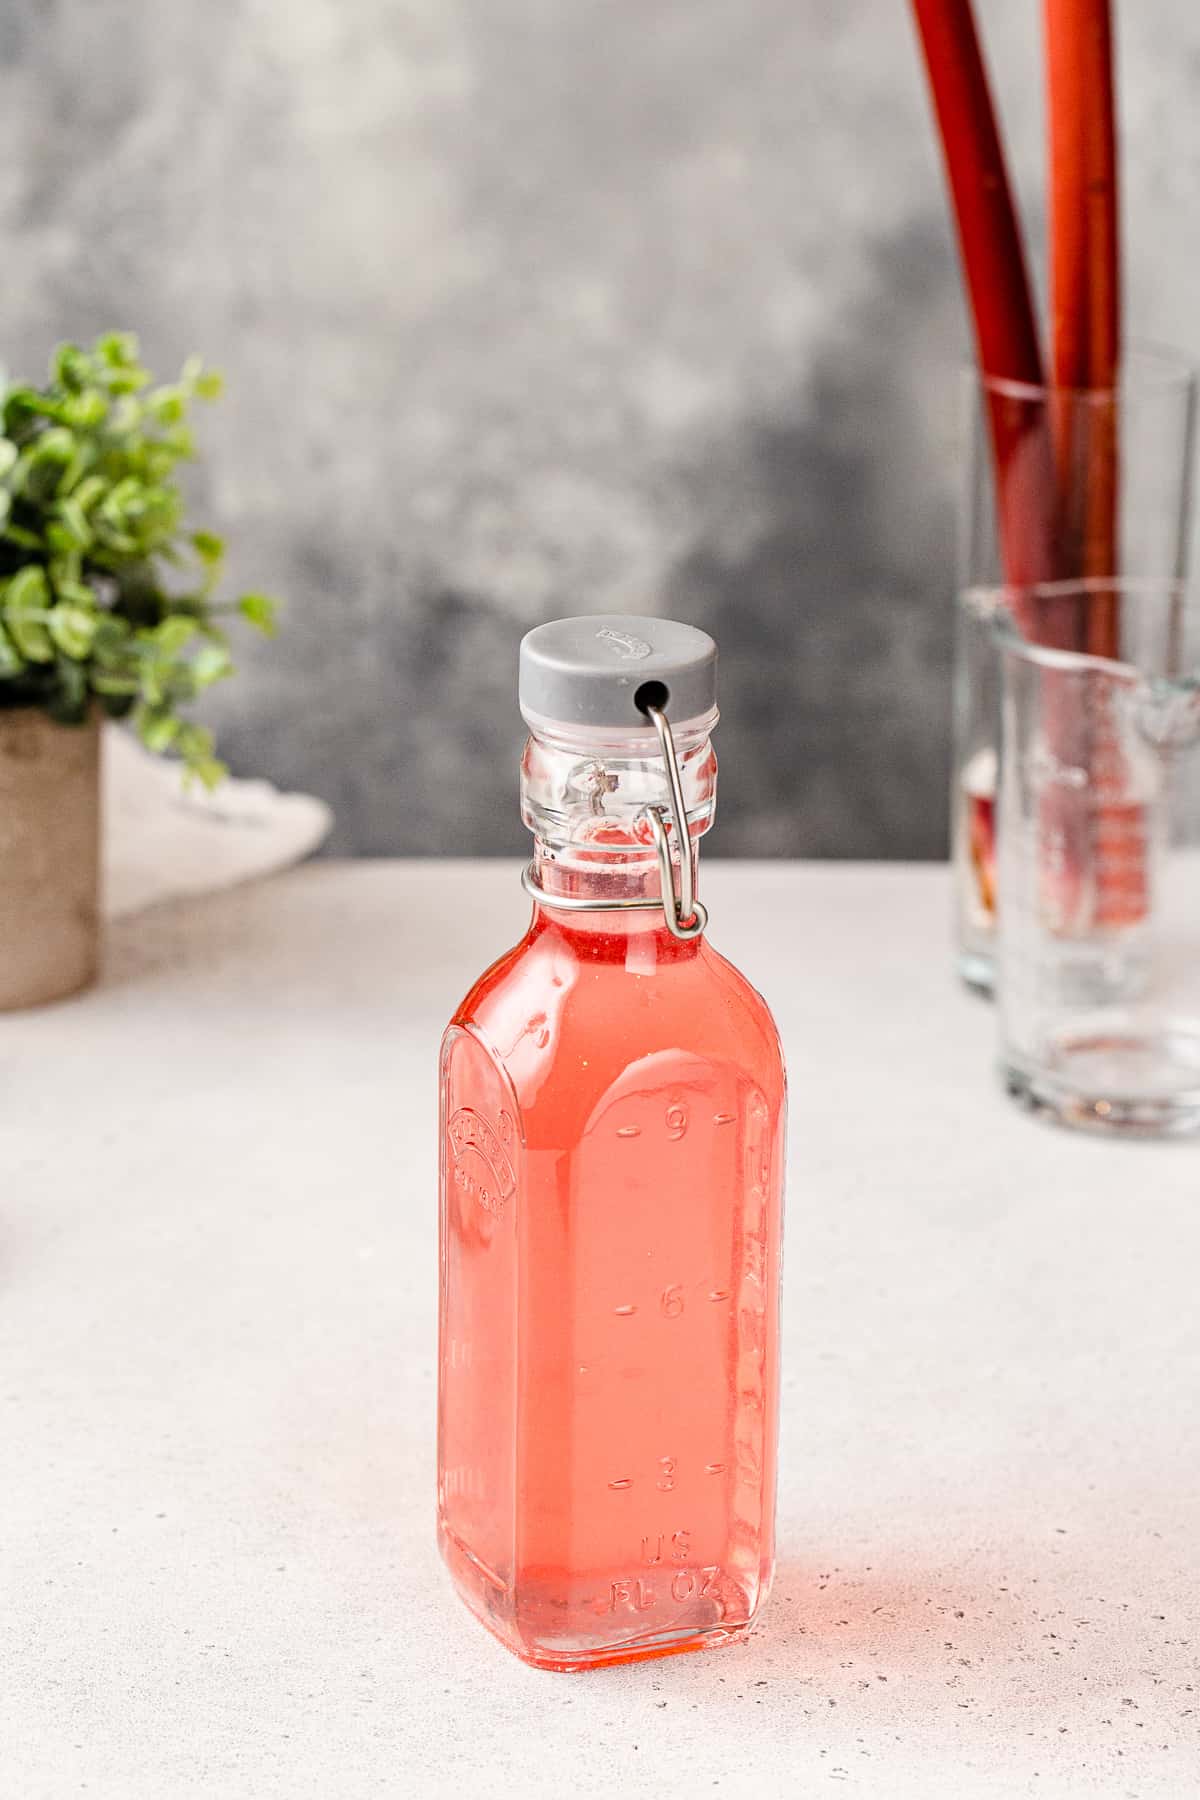 Glass bottle filled with pink rhubarb syrup with greenery and stalks of rhubarb in the background.